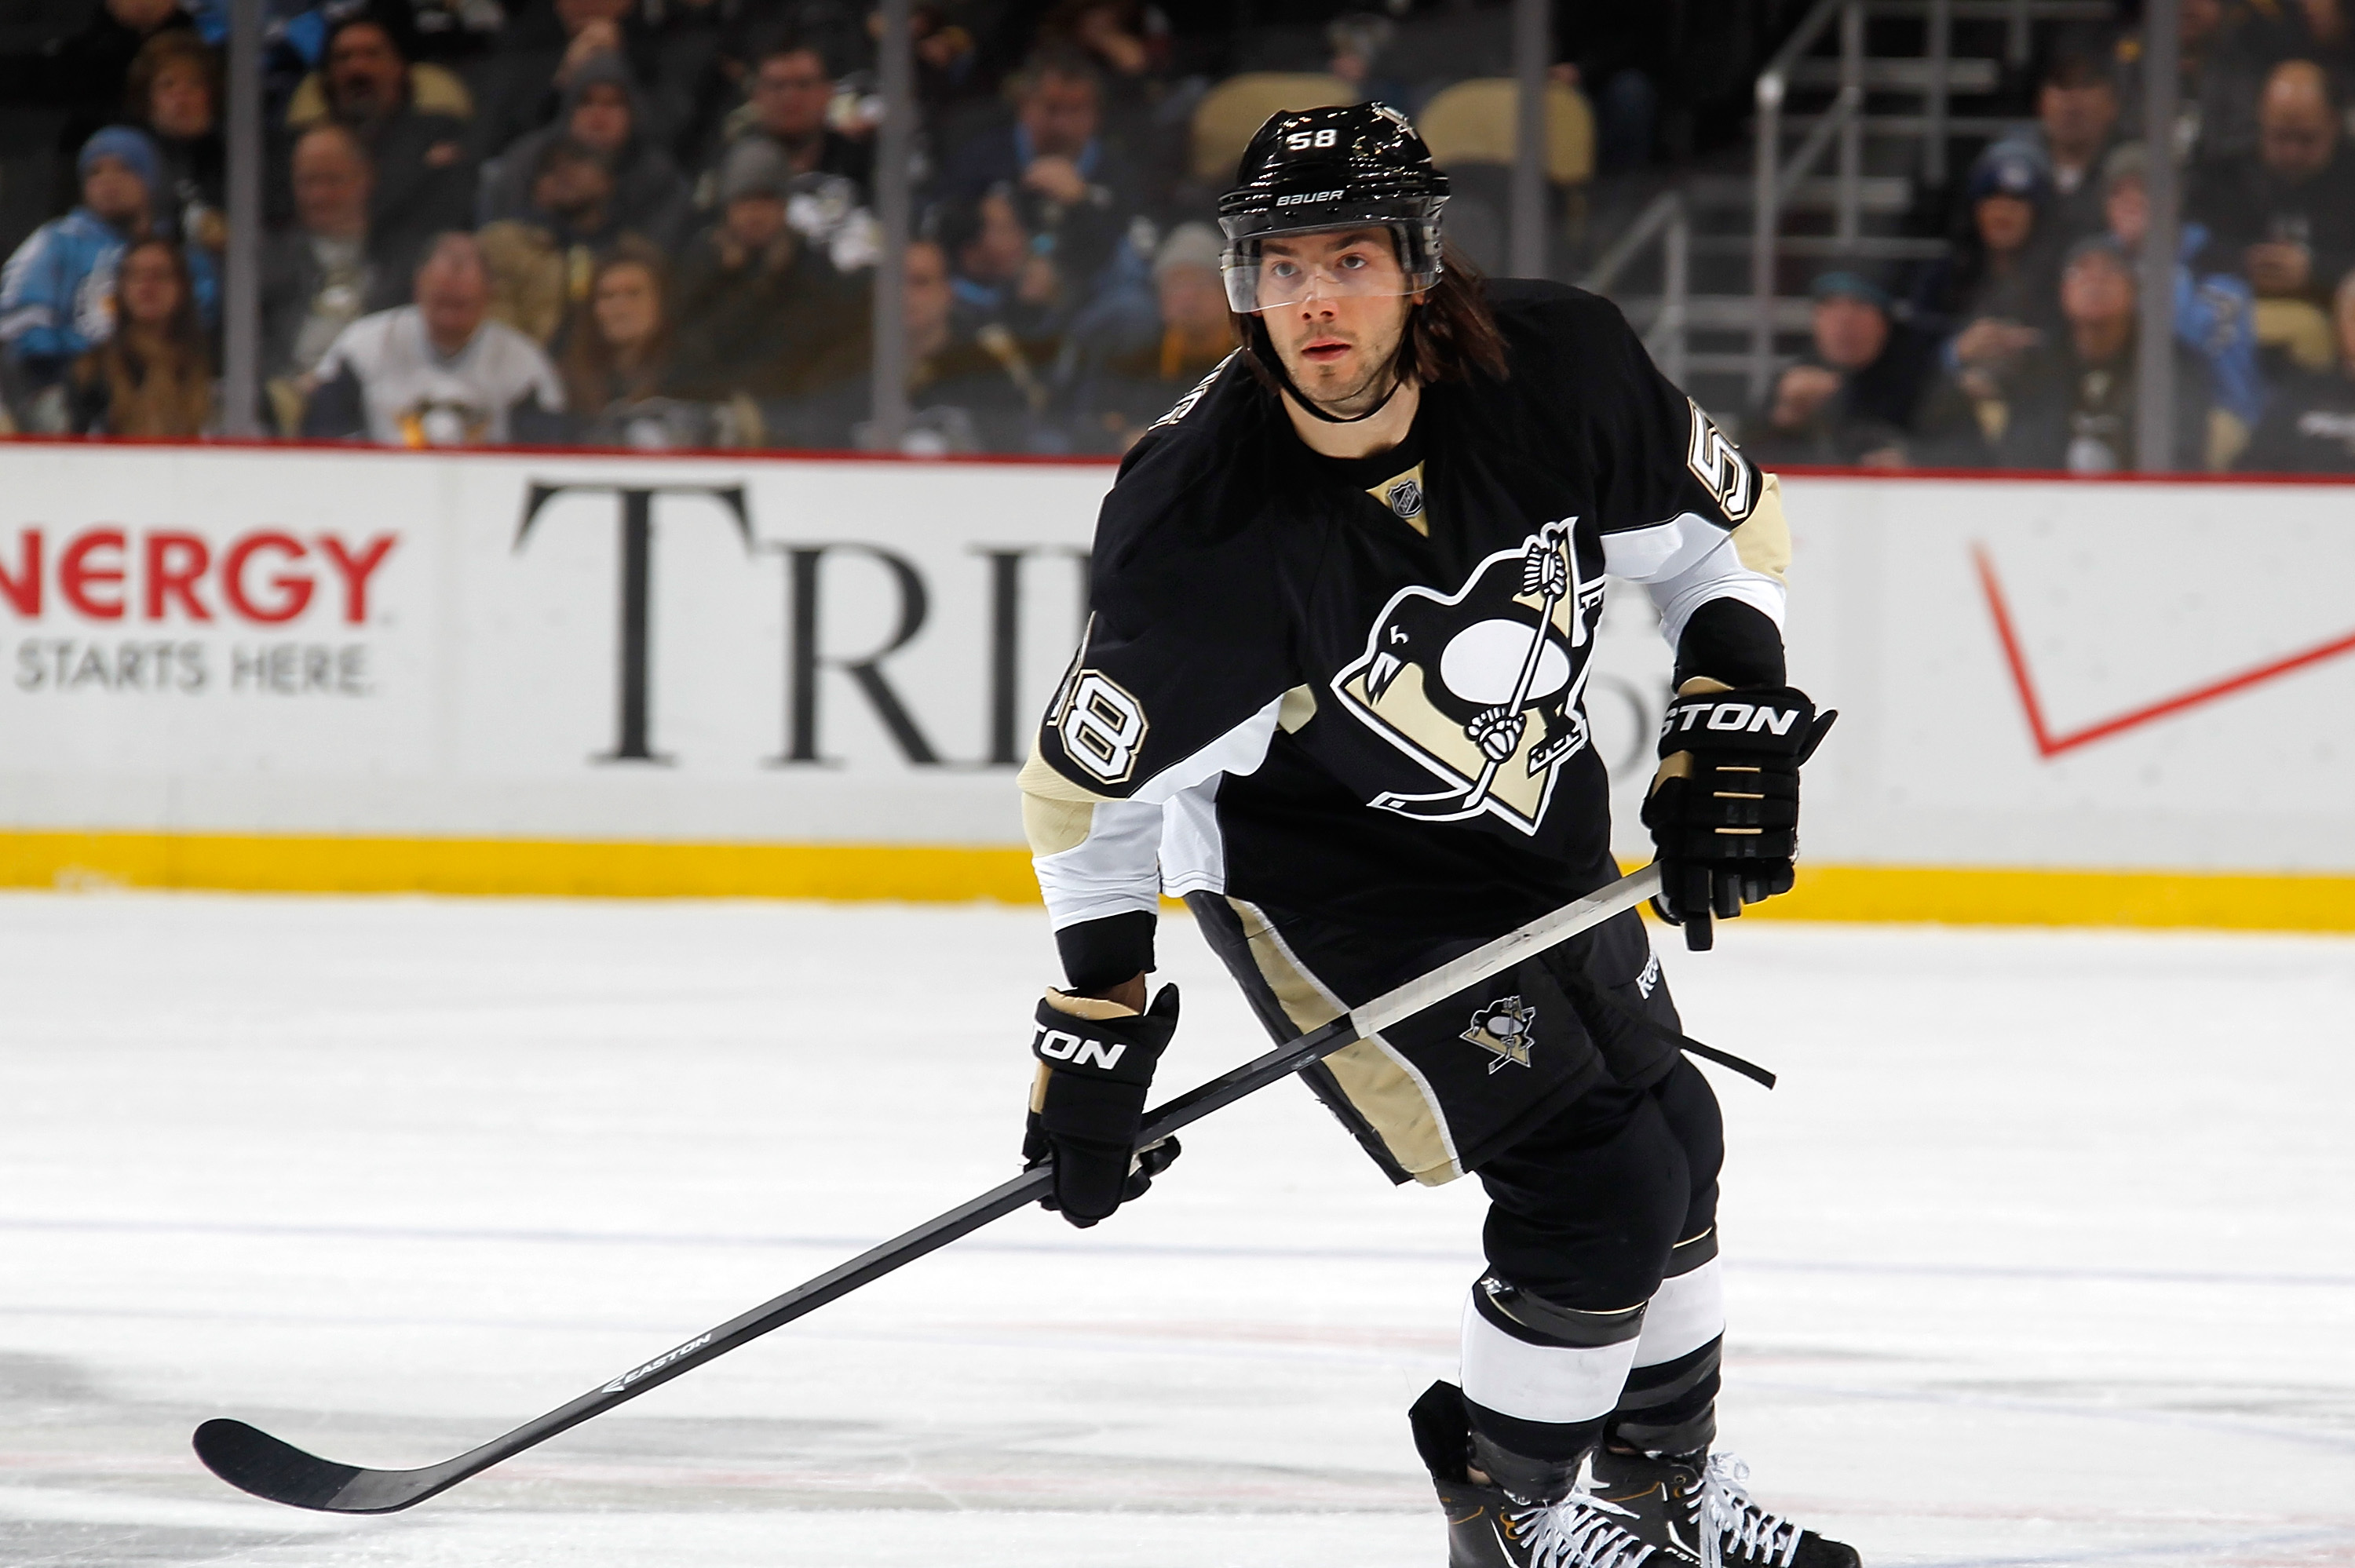 Penguins D Kris Letang's statement after suffering another stroke